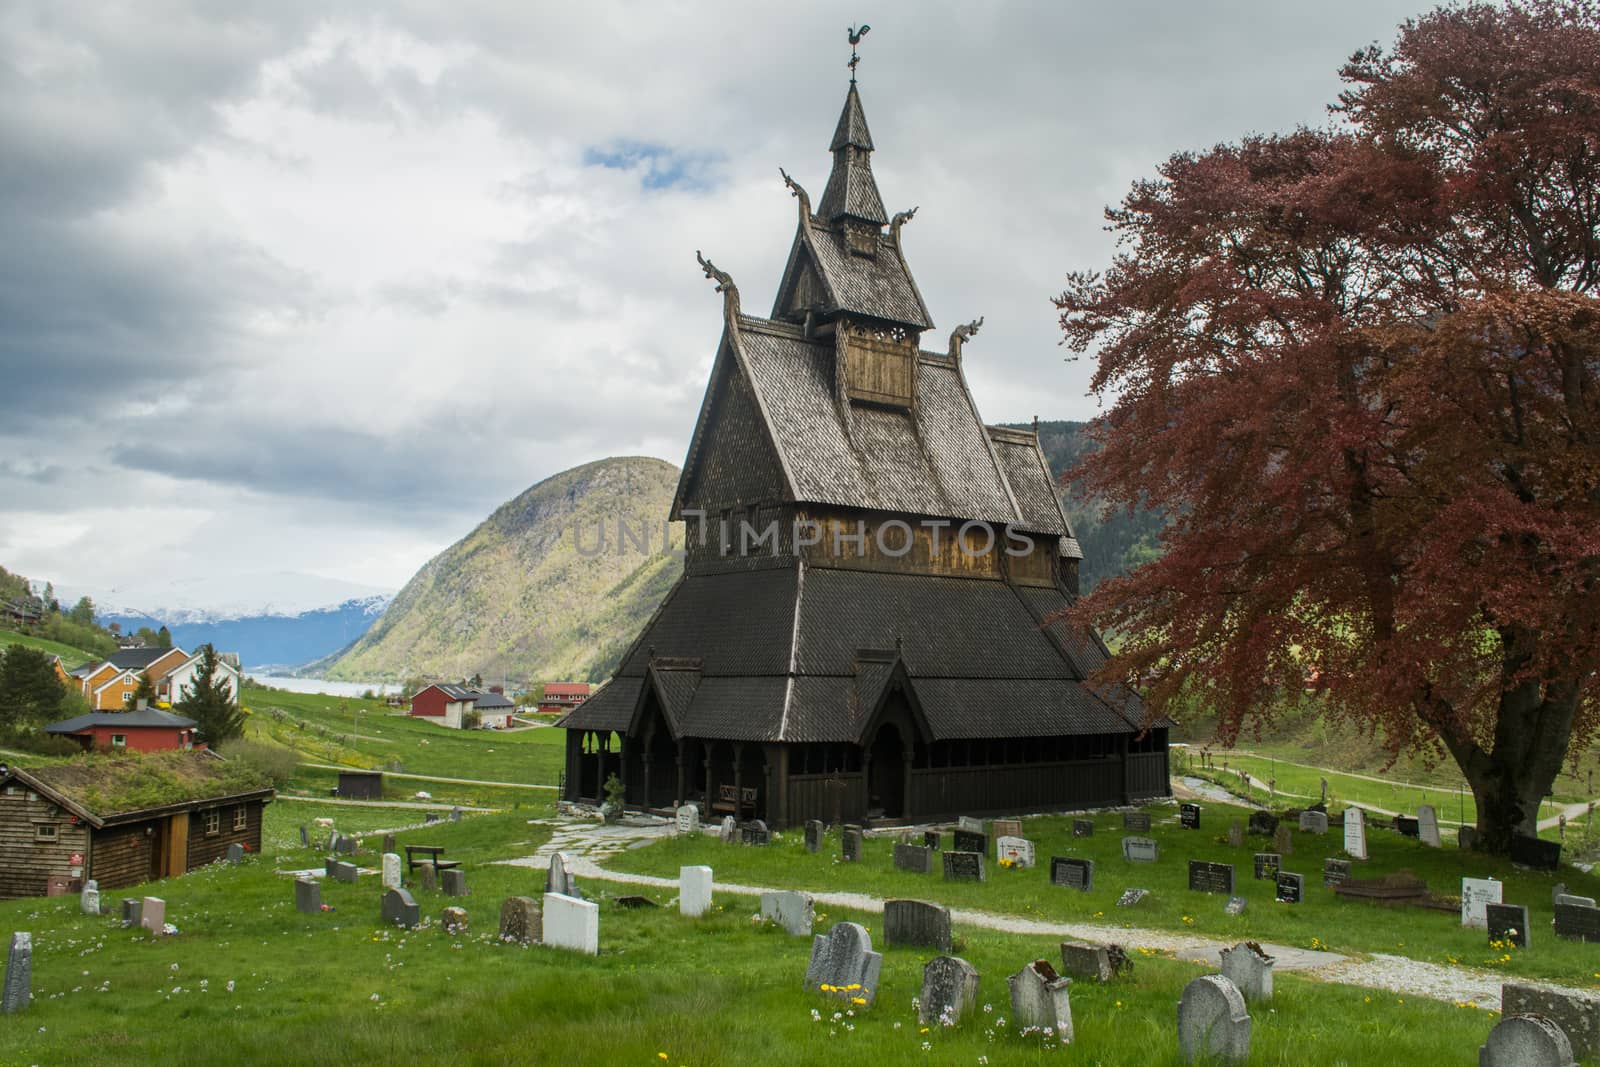 Old stave church of Hopperstad Norway by kb79